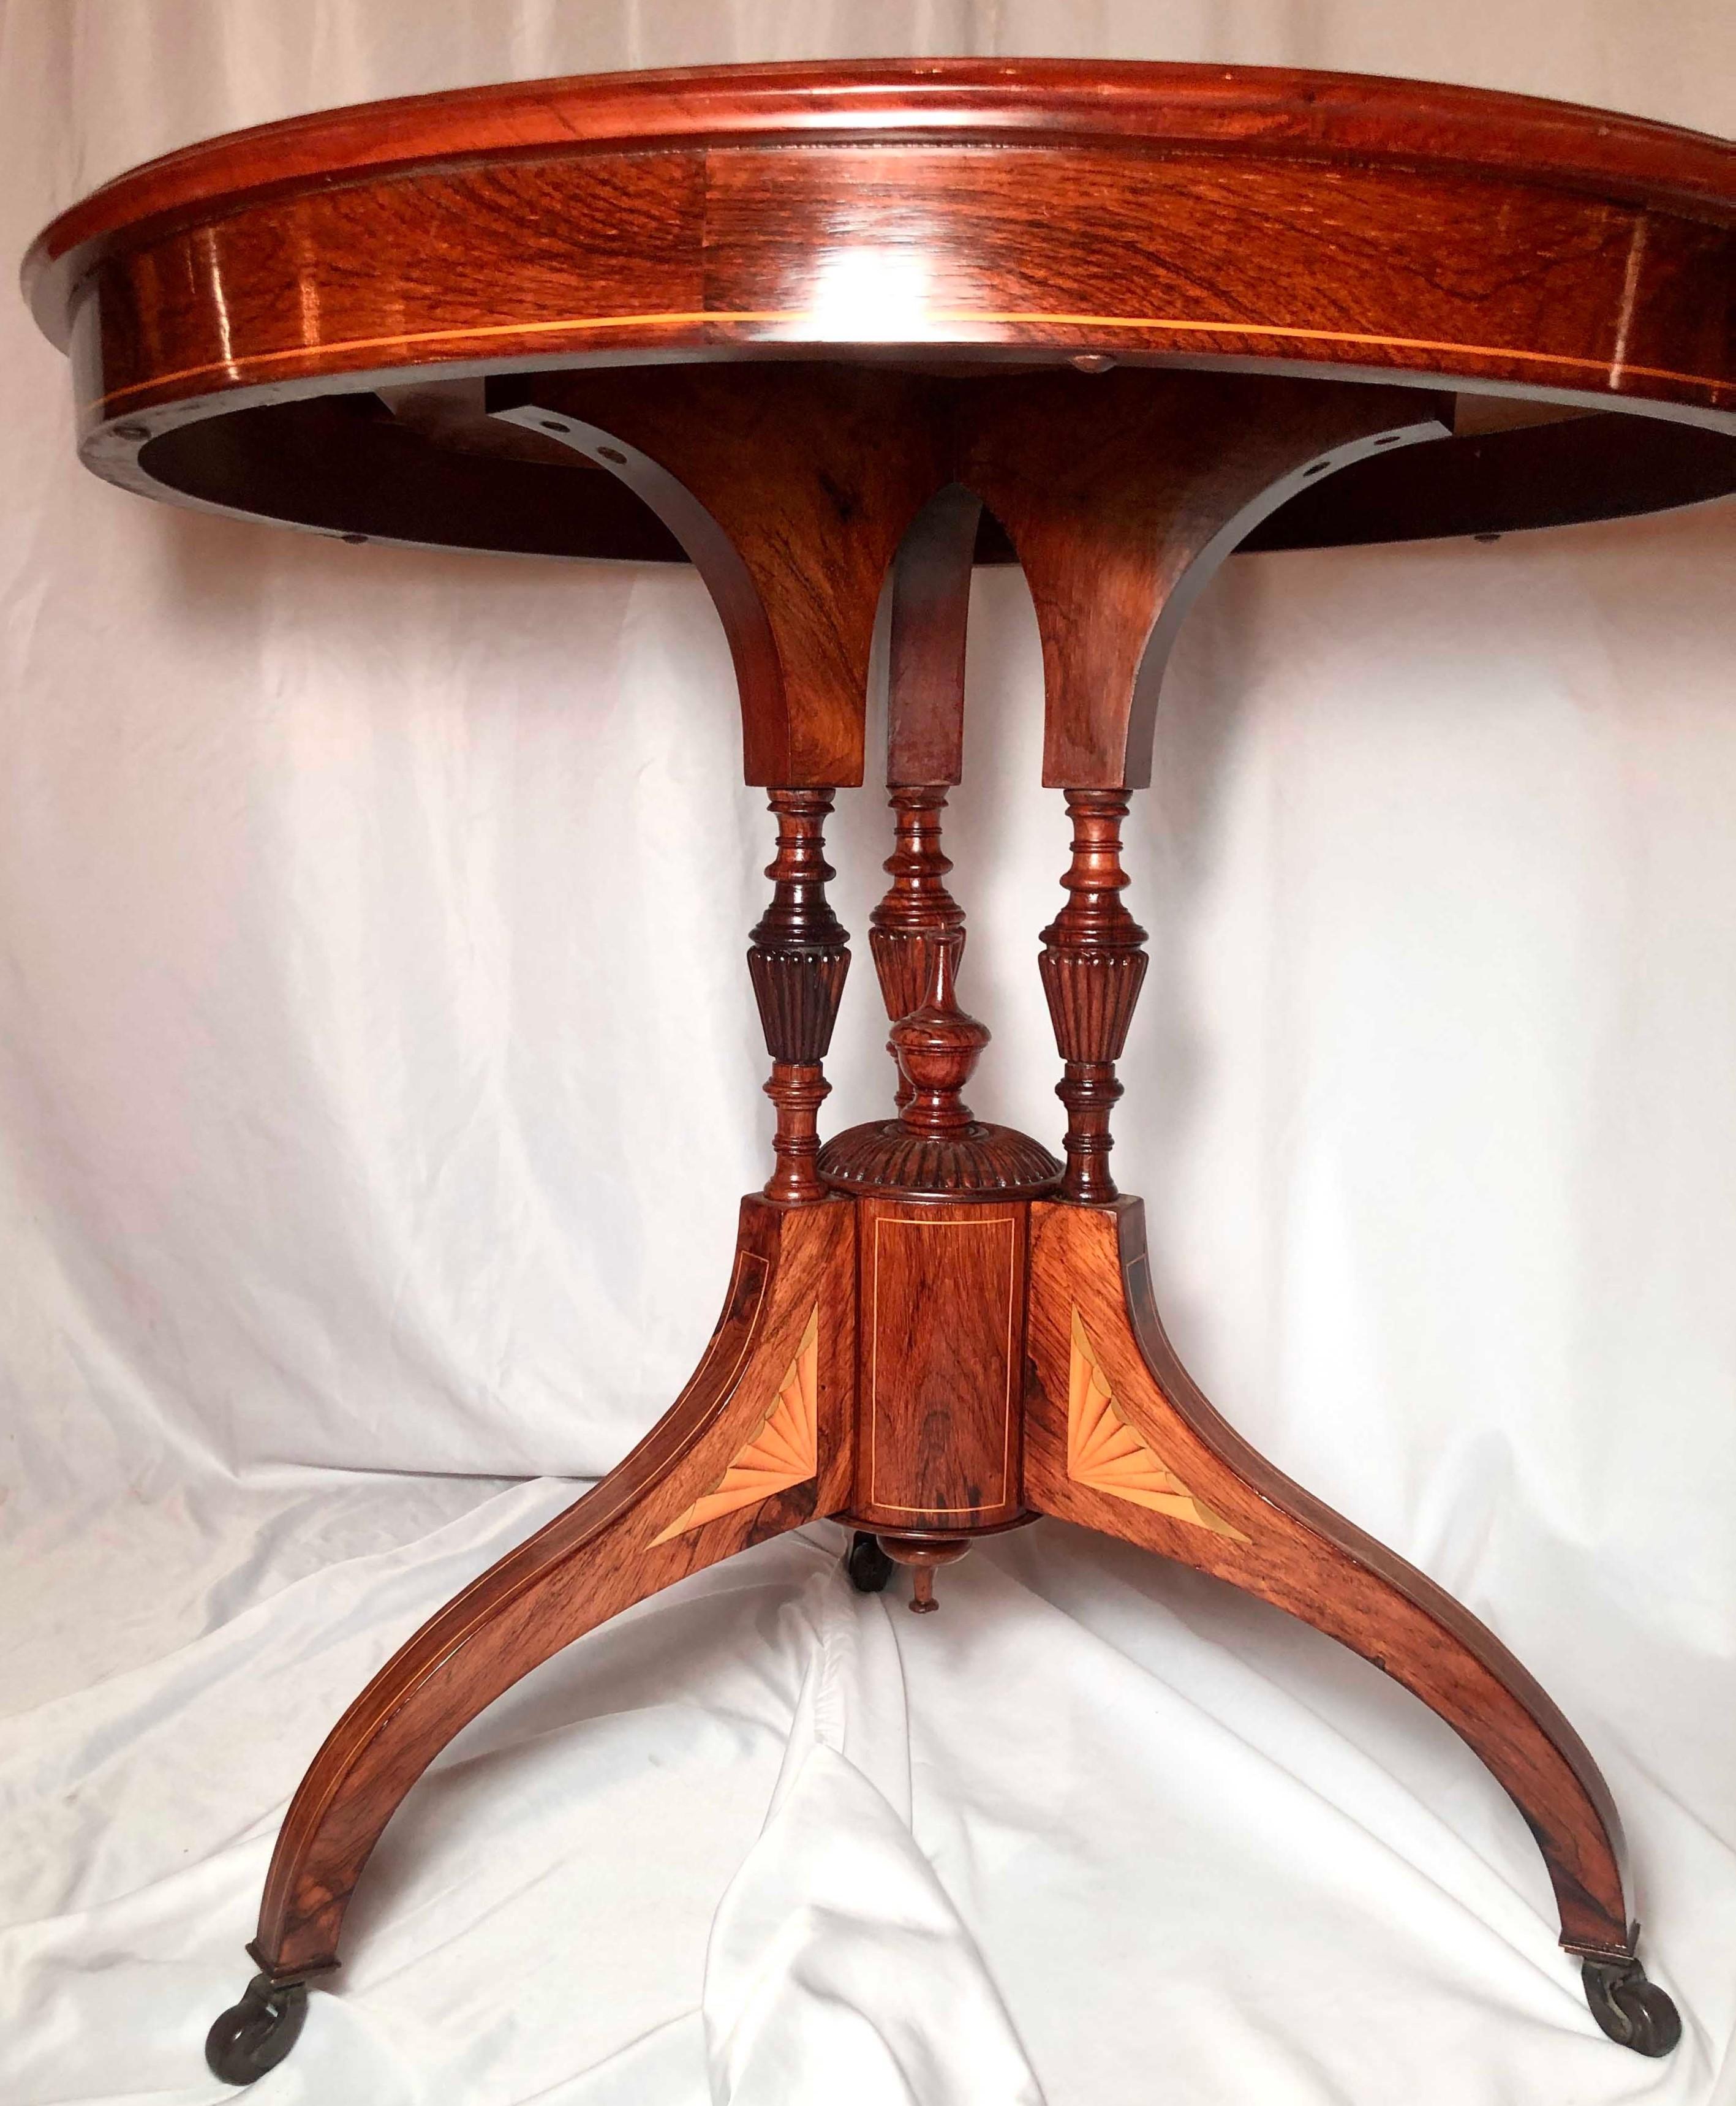 19th Century Antique English Victorian Rosewood Table with Inlay, Circa 1860- 1870 For Sale